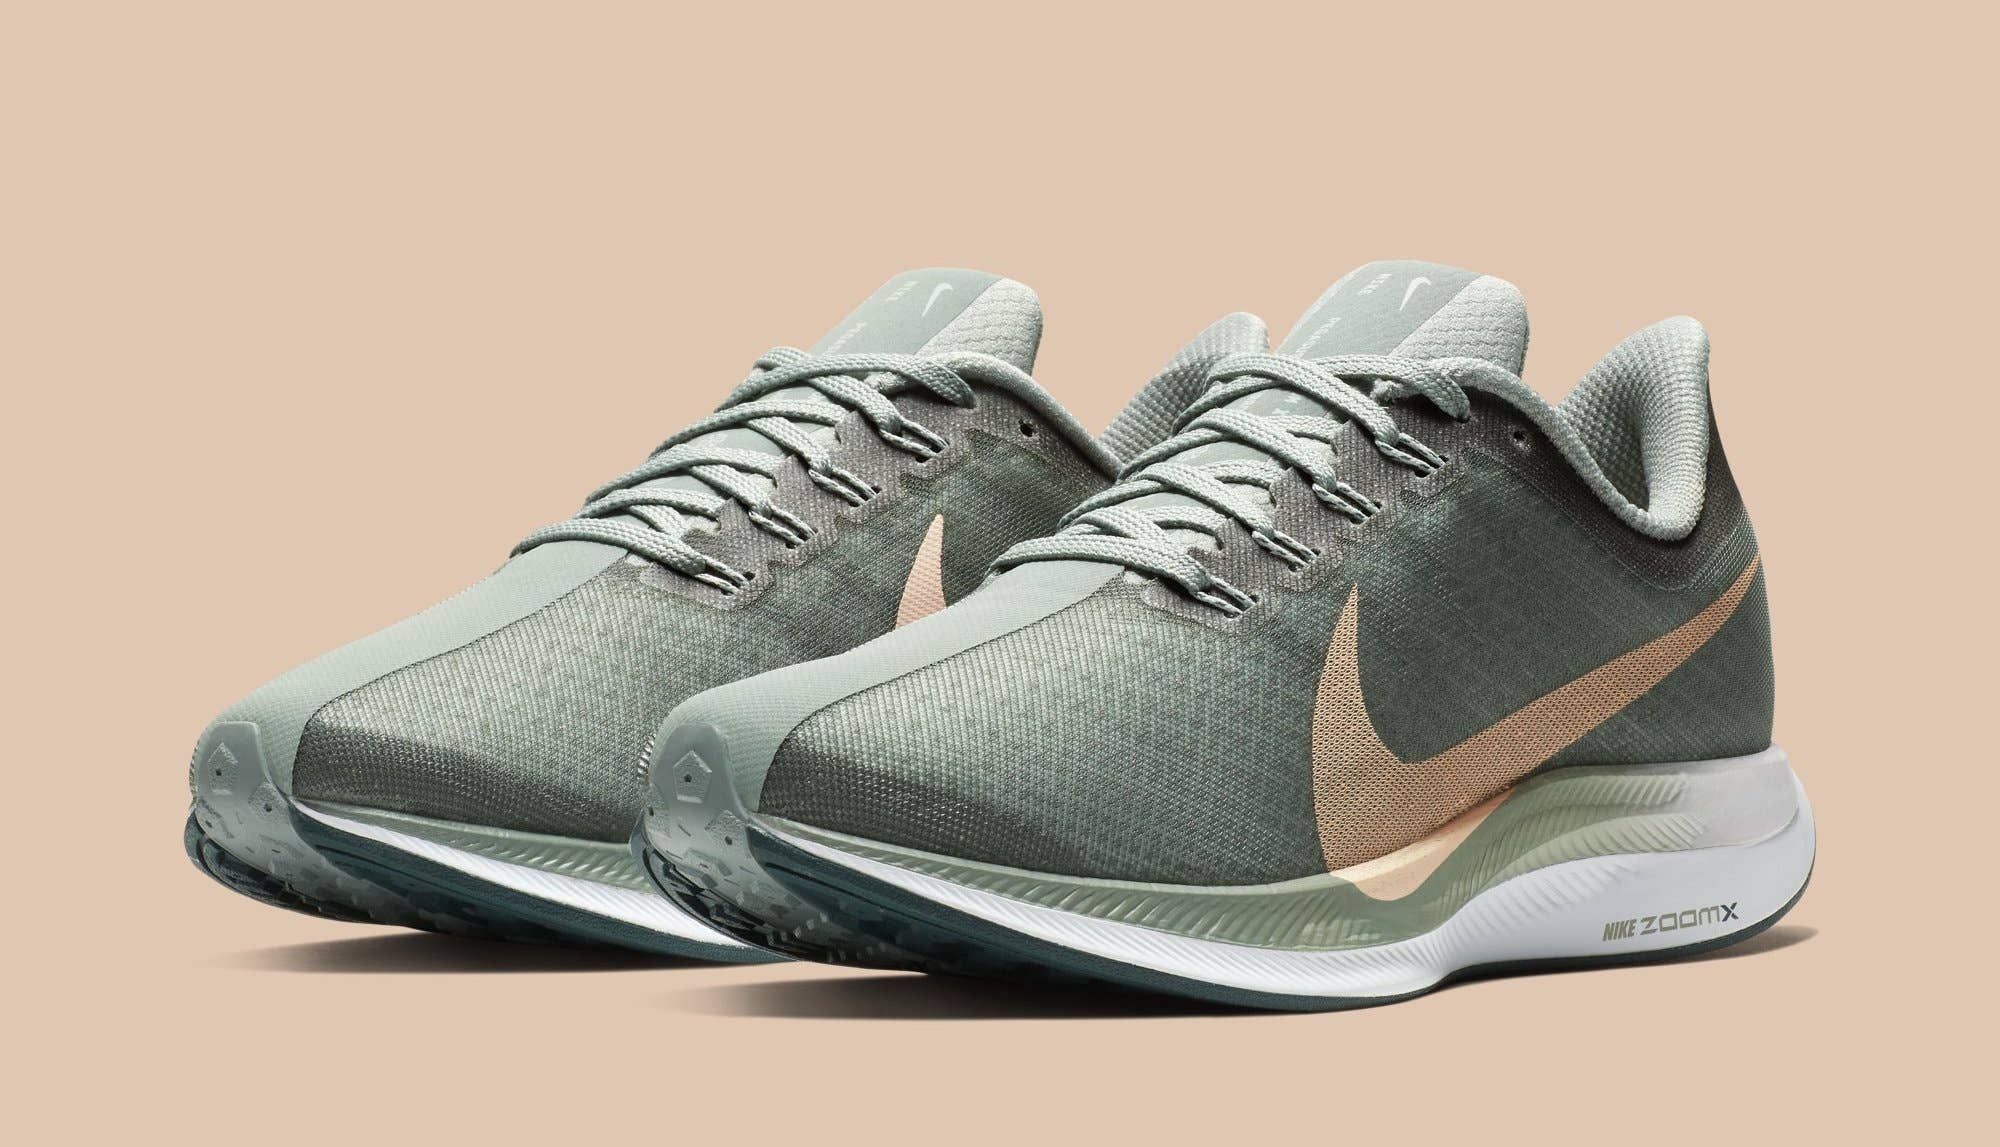 Another Colorway of the Zoom Pegasus Turbo Coming | Complex